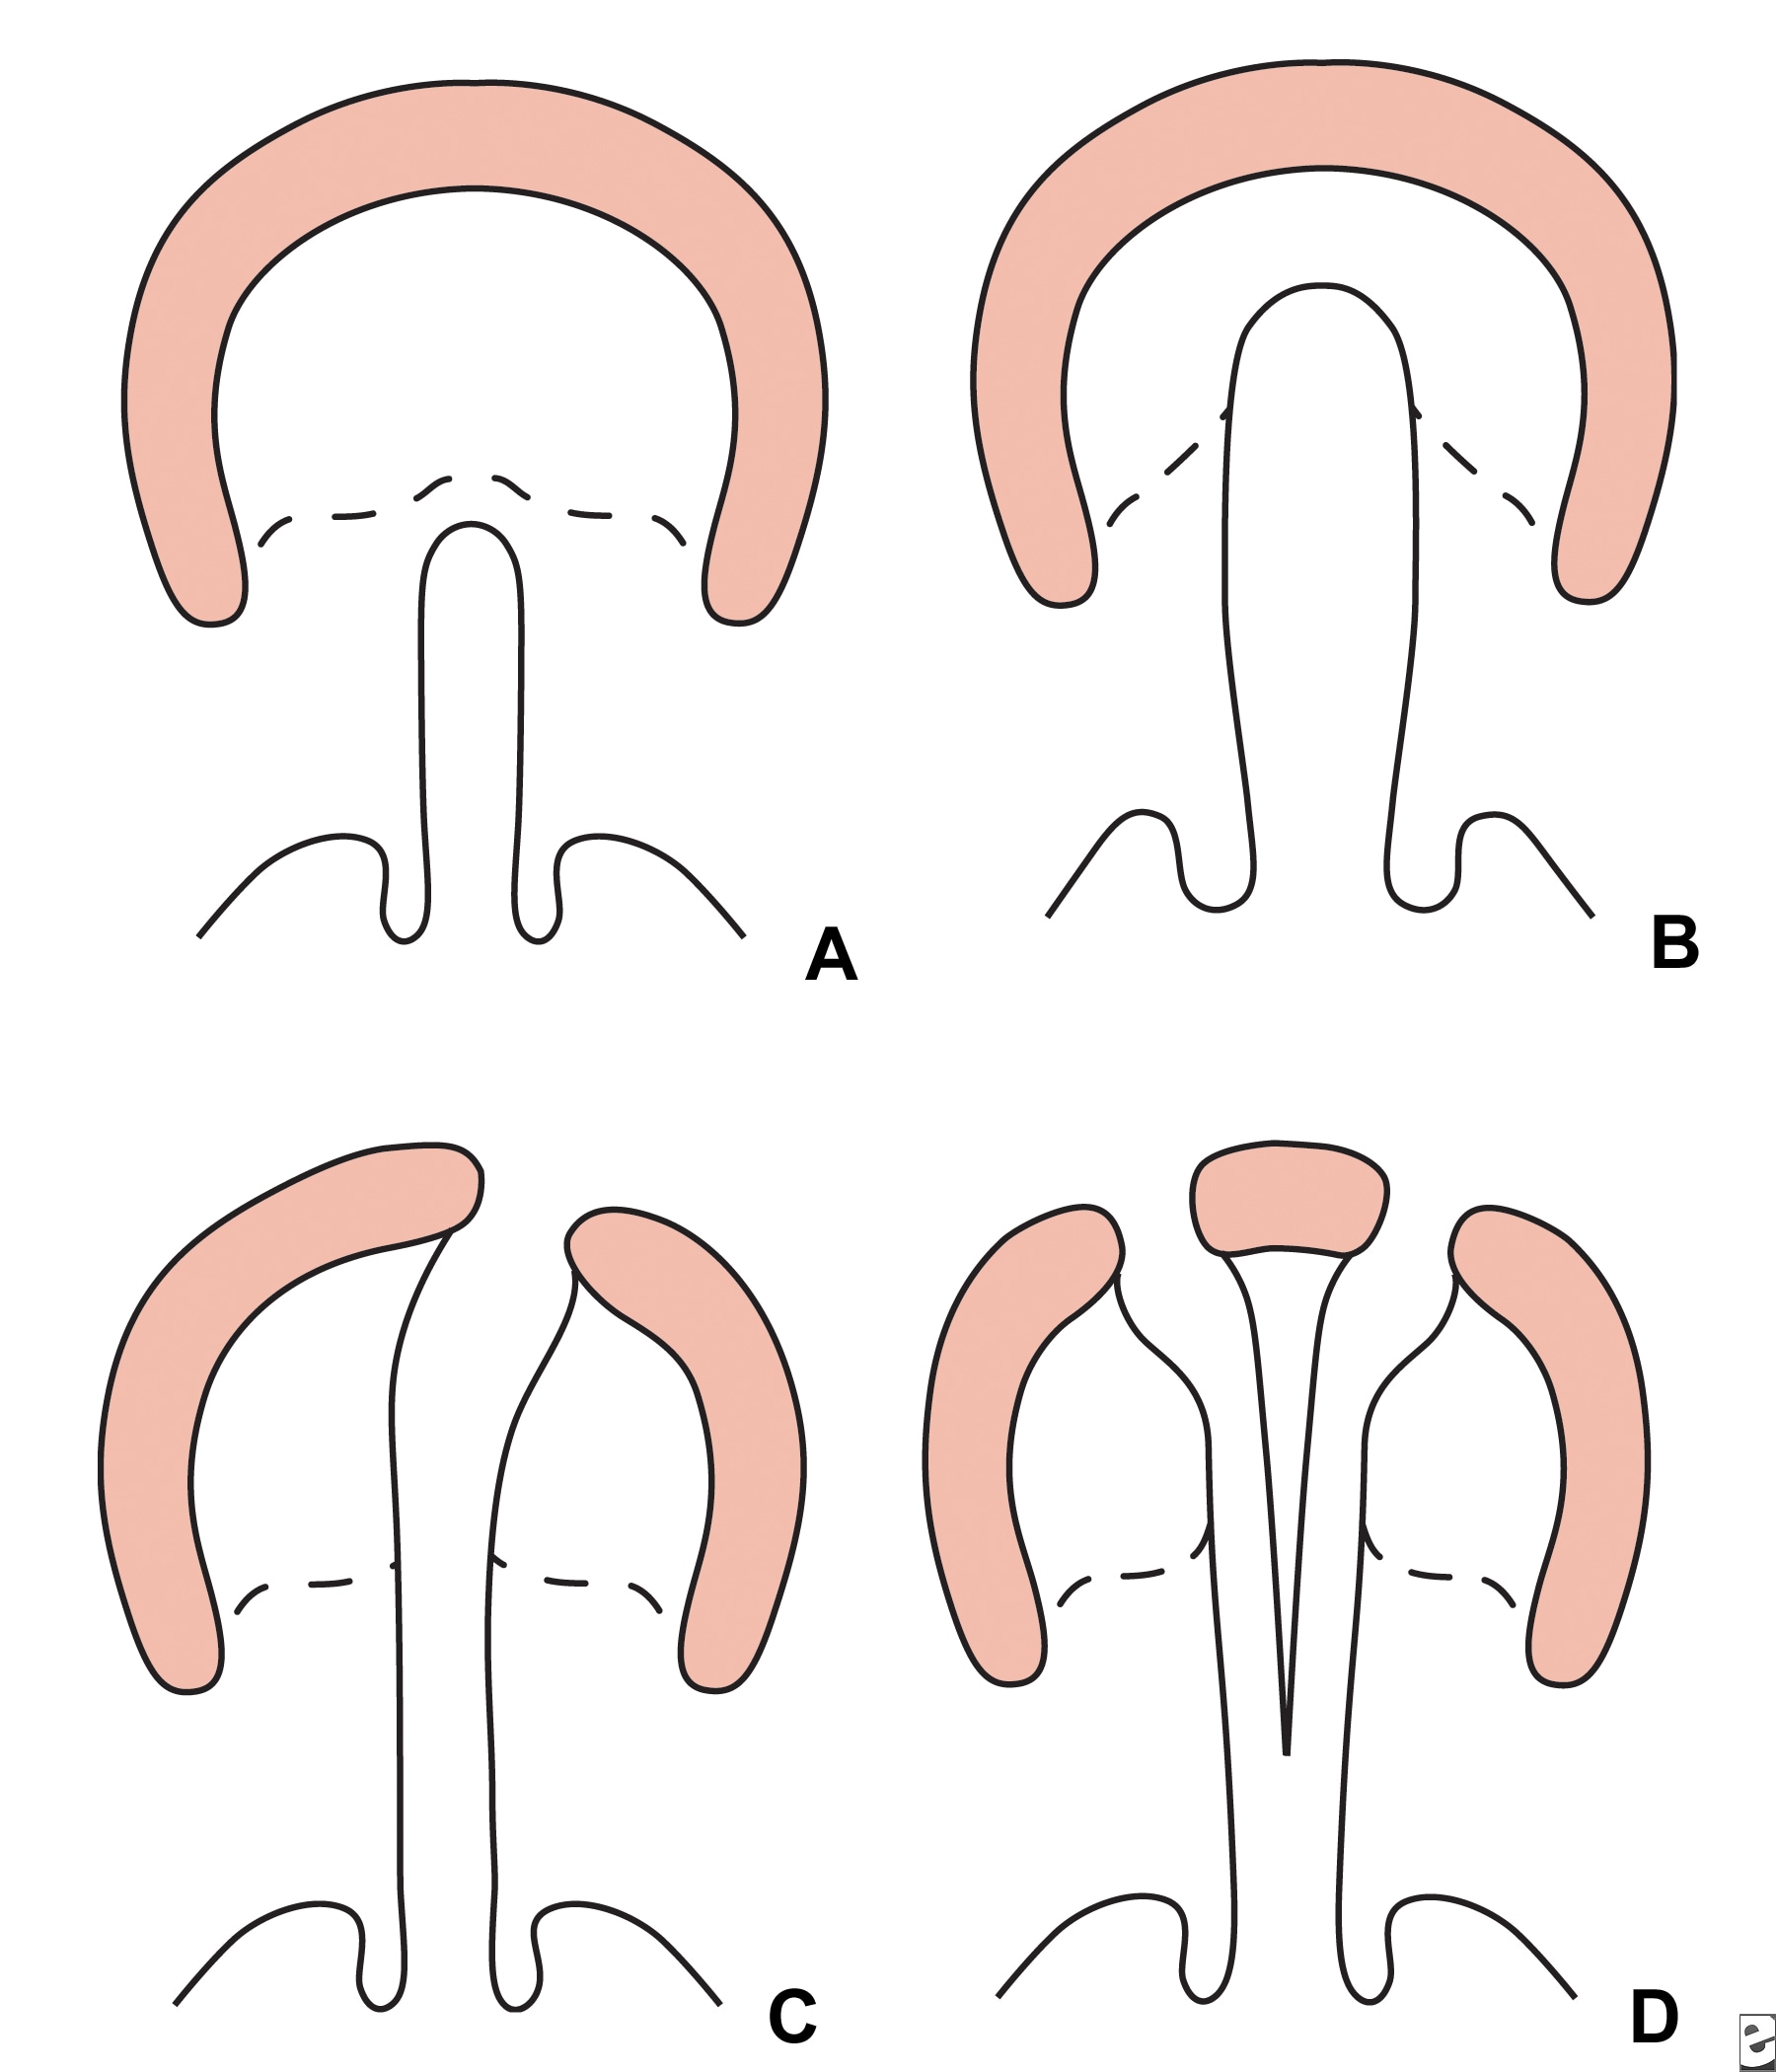 Veau classification of cleft lip  and palate.